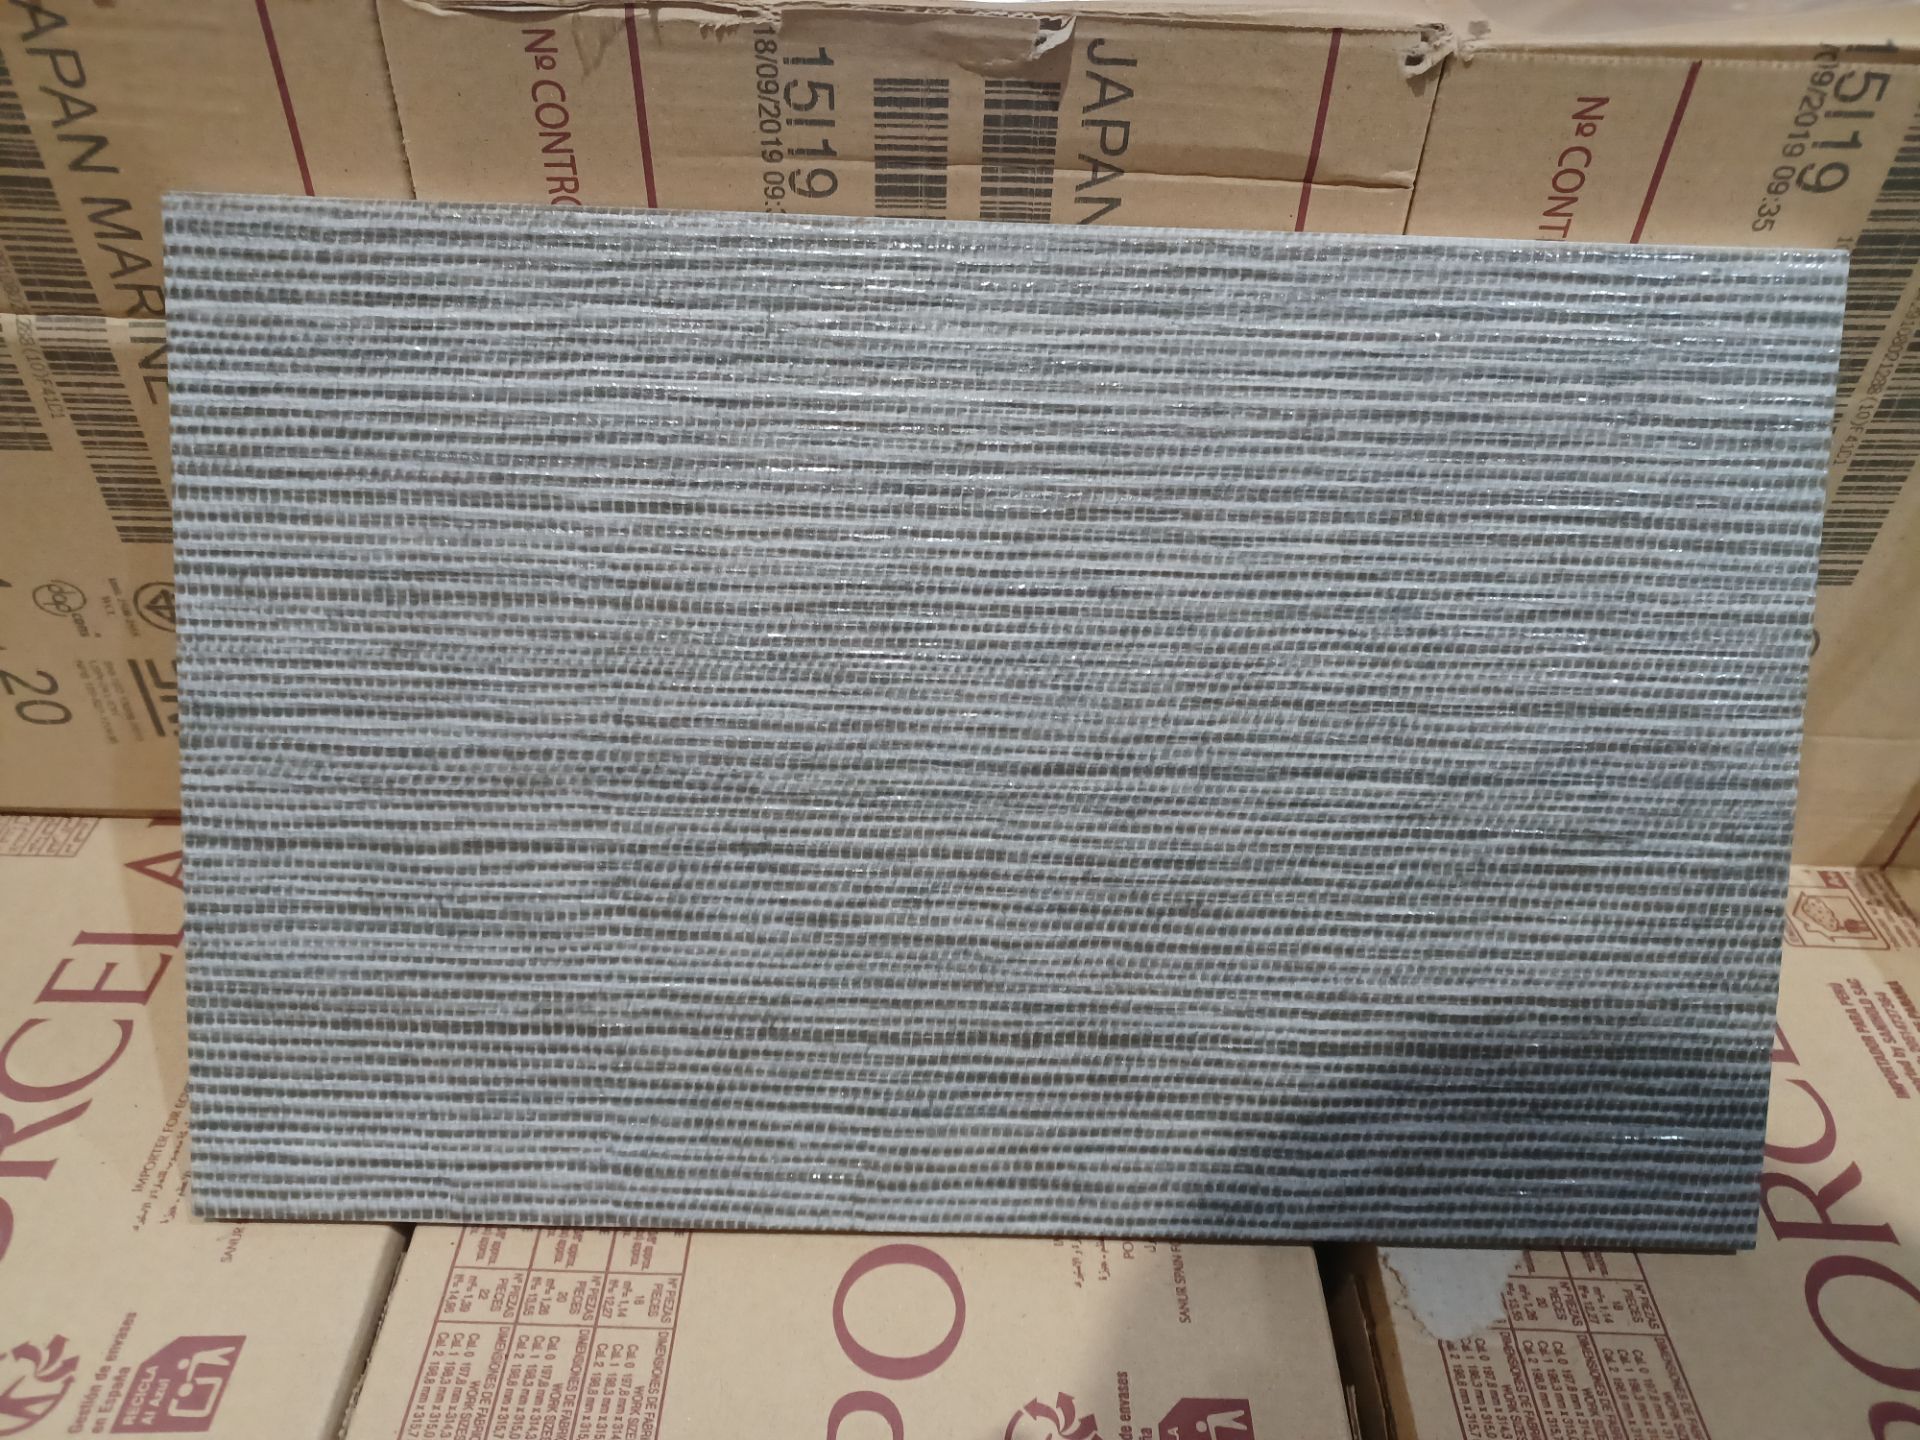 10 x PACKS OF PORCELANOSA JAPAN MARINE WALL TILES. SIZE: 200x316mm. Each box contains 1.28m2, giving